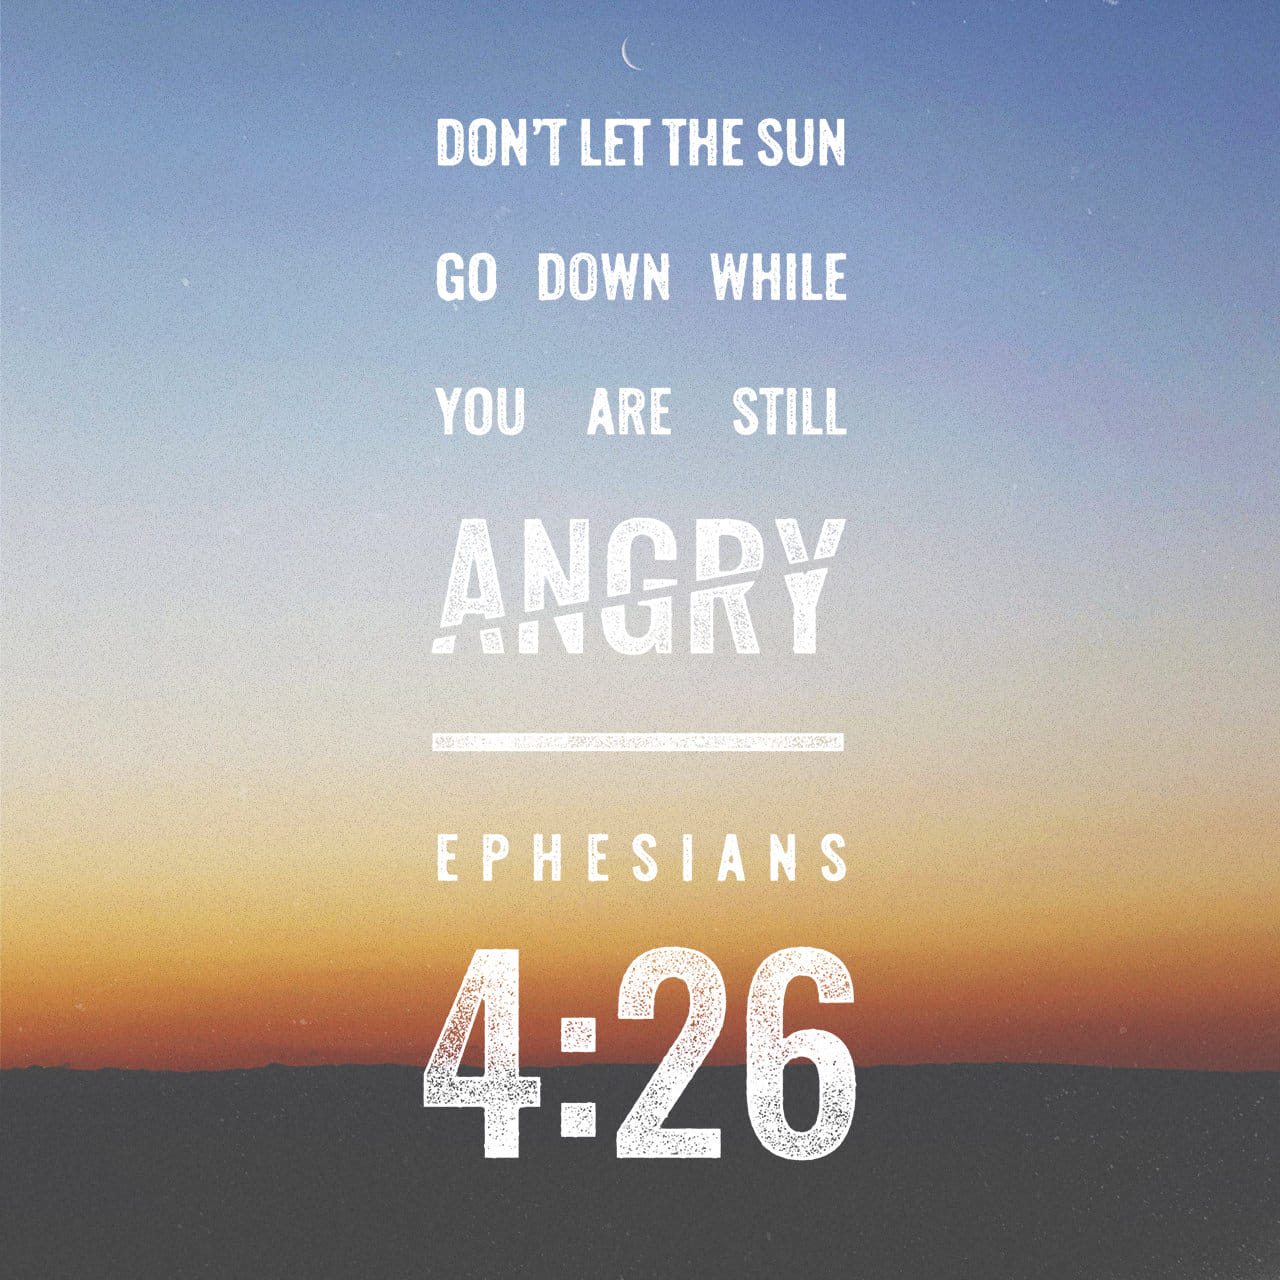 Ephesians 426 27 “be Angry And Do Not Sin” Do Not Let The Sun Go 5591